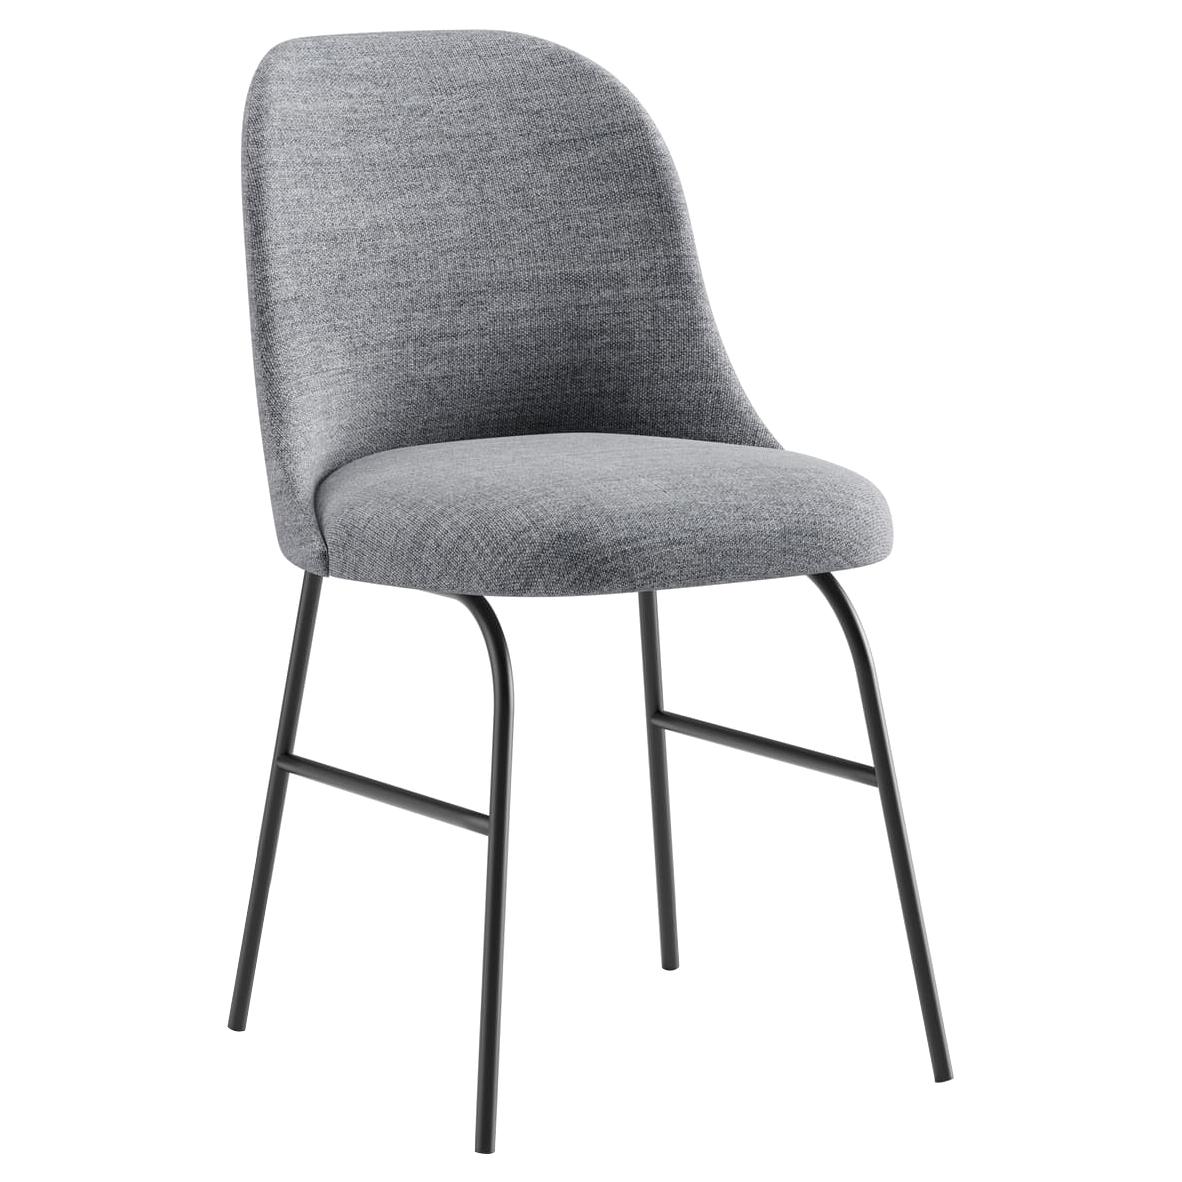 Viccarbe Aleta Dining Chair Designed by Jaime Hayon in Fabric Remix 143 For Sale